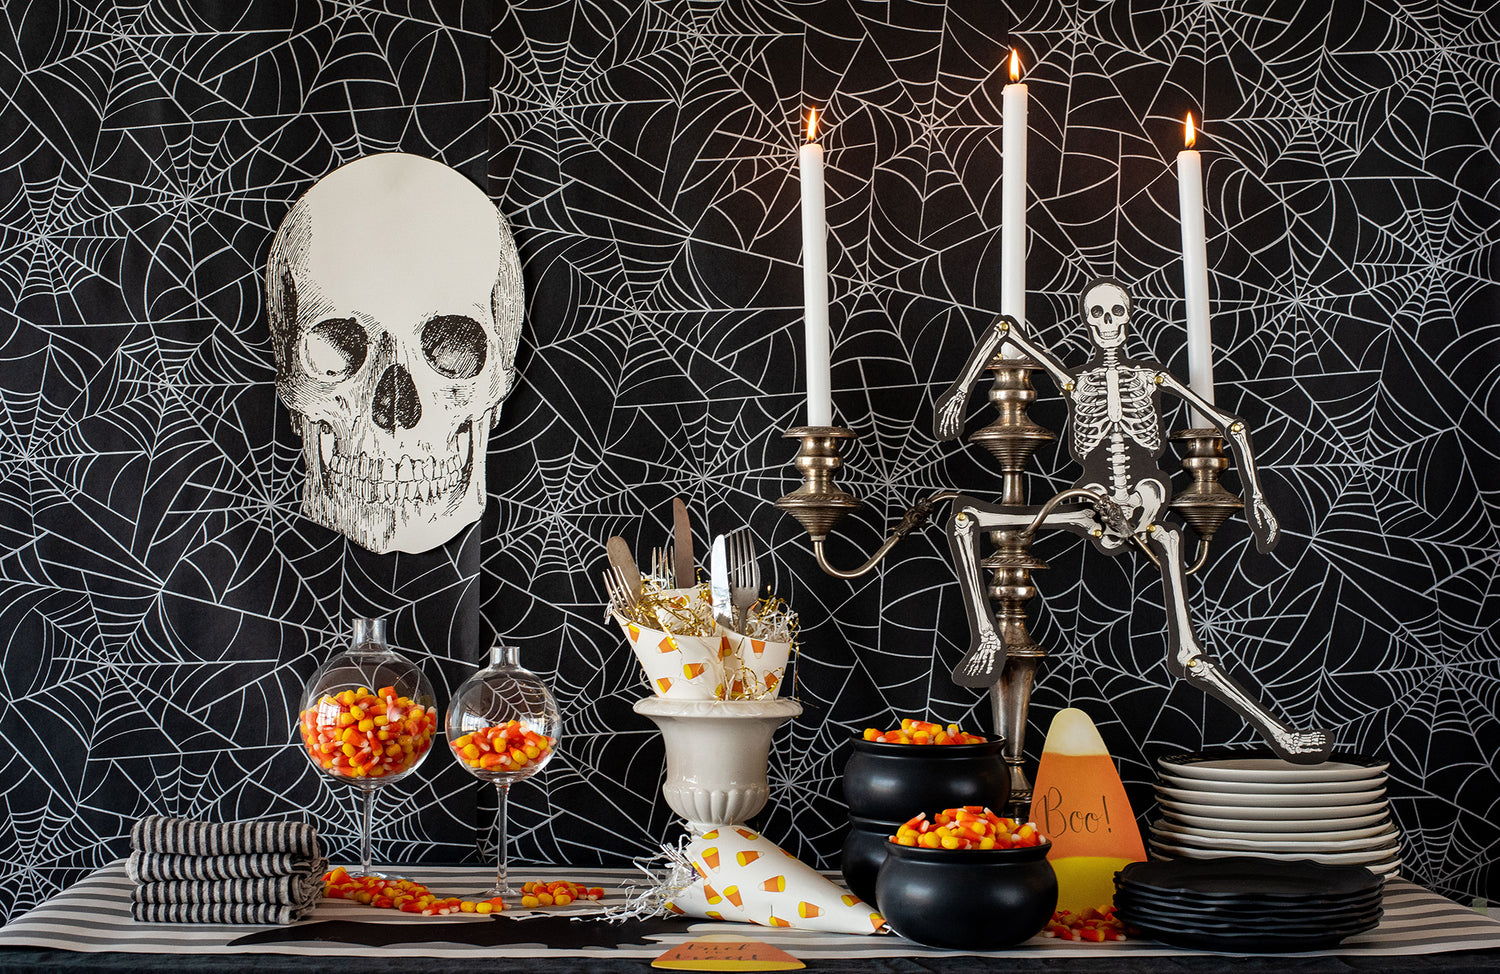 The Die-cut Skull Placemat used as decoration for a Halloween treat table.